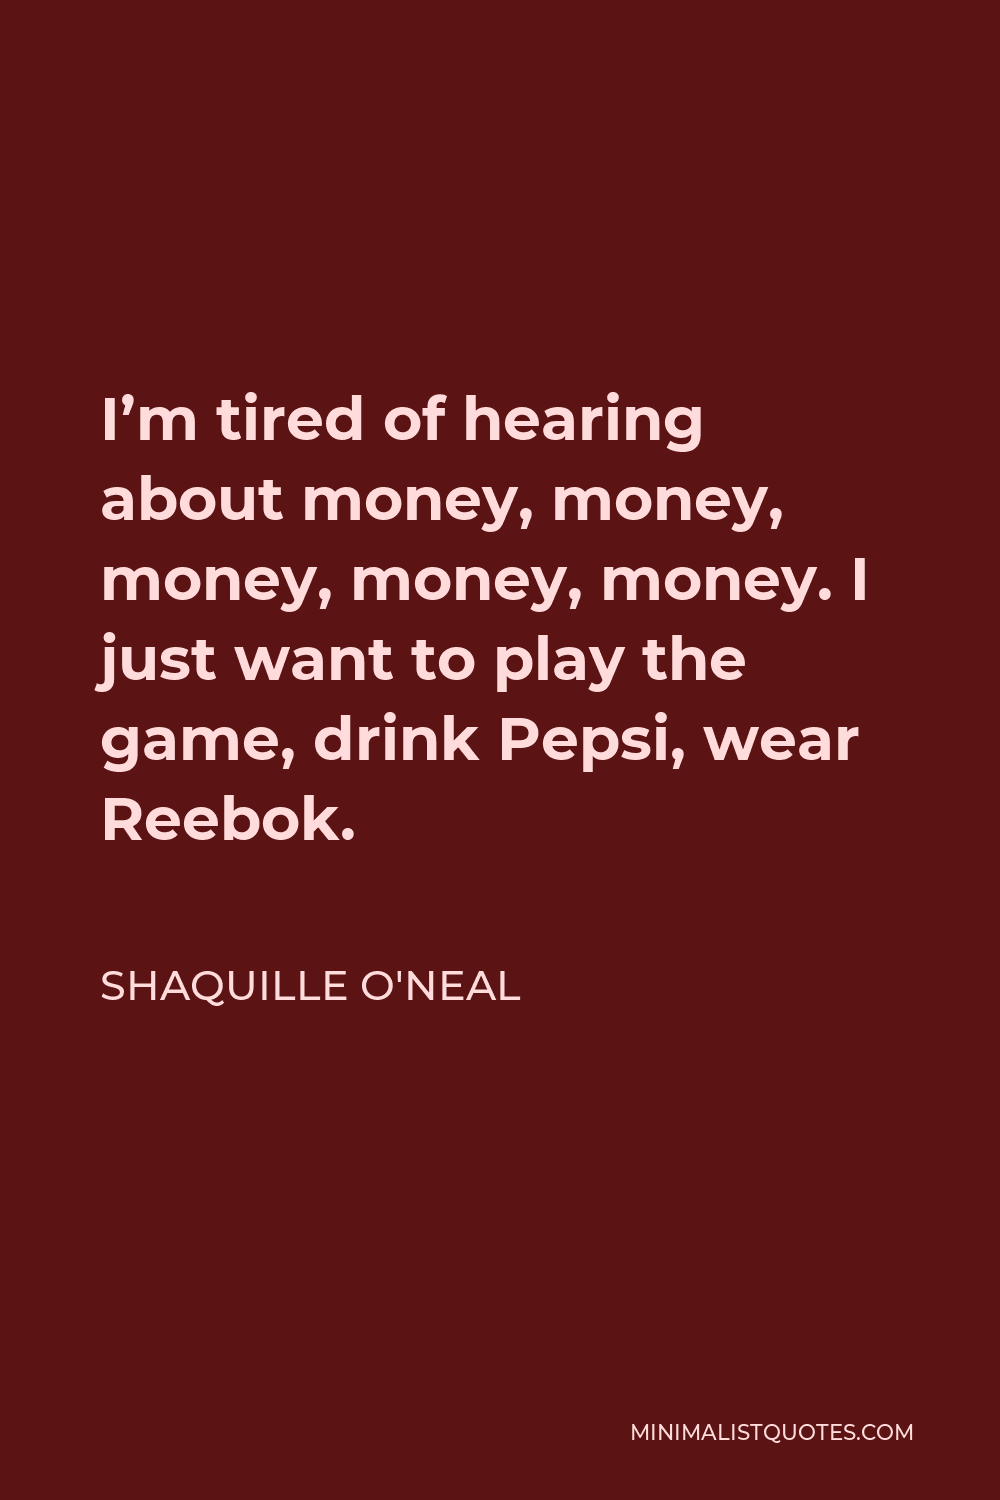 Shaquille O'Neal Quote: “A pinch is a pinch. If you pinch my right nipple,  I'm going to say, 'ouch.' If I pinch your right nipple, you're going t”